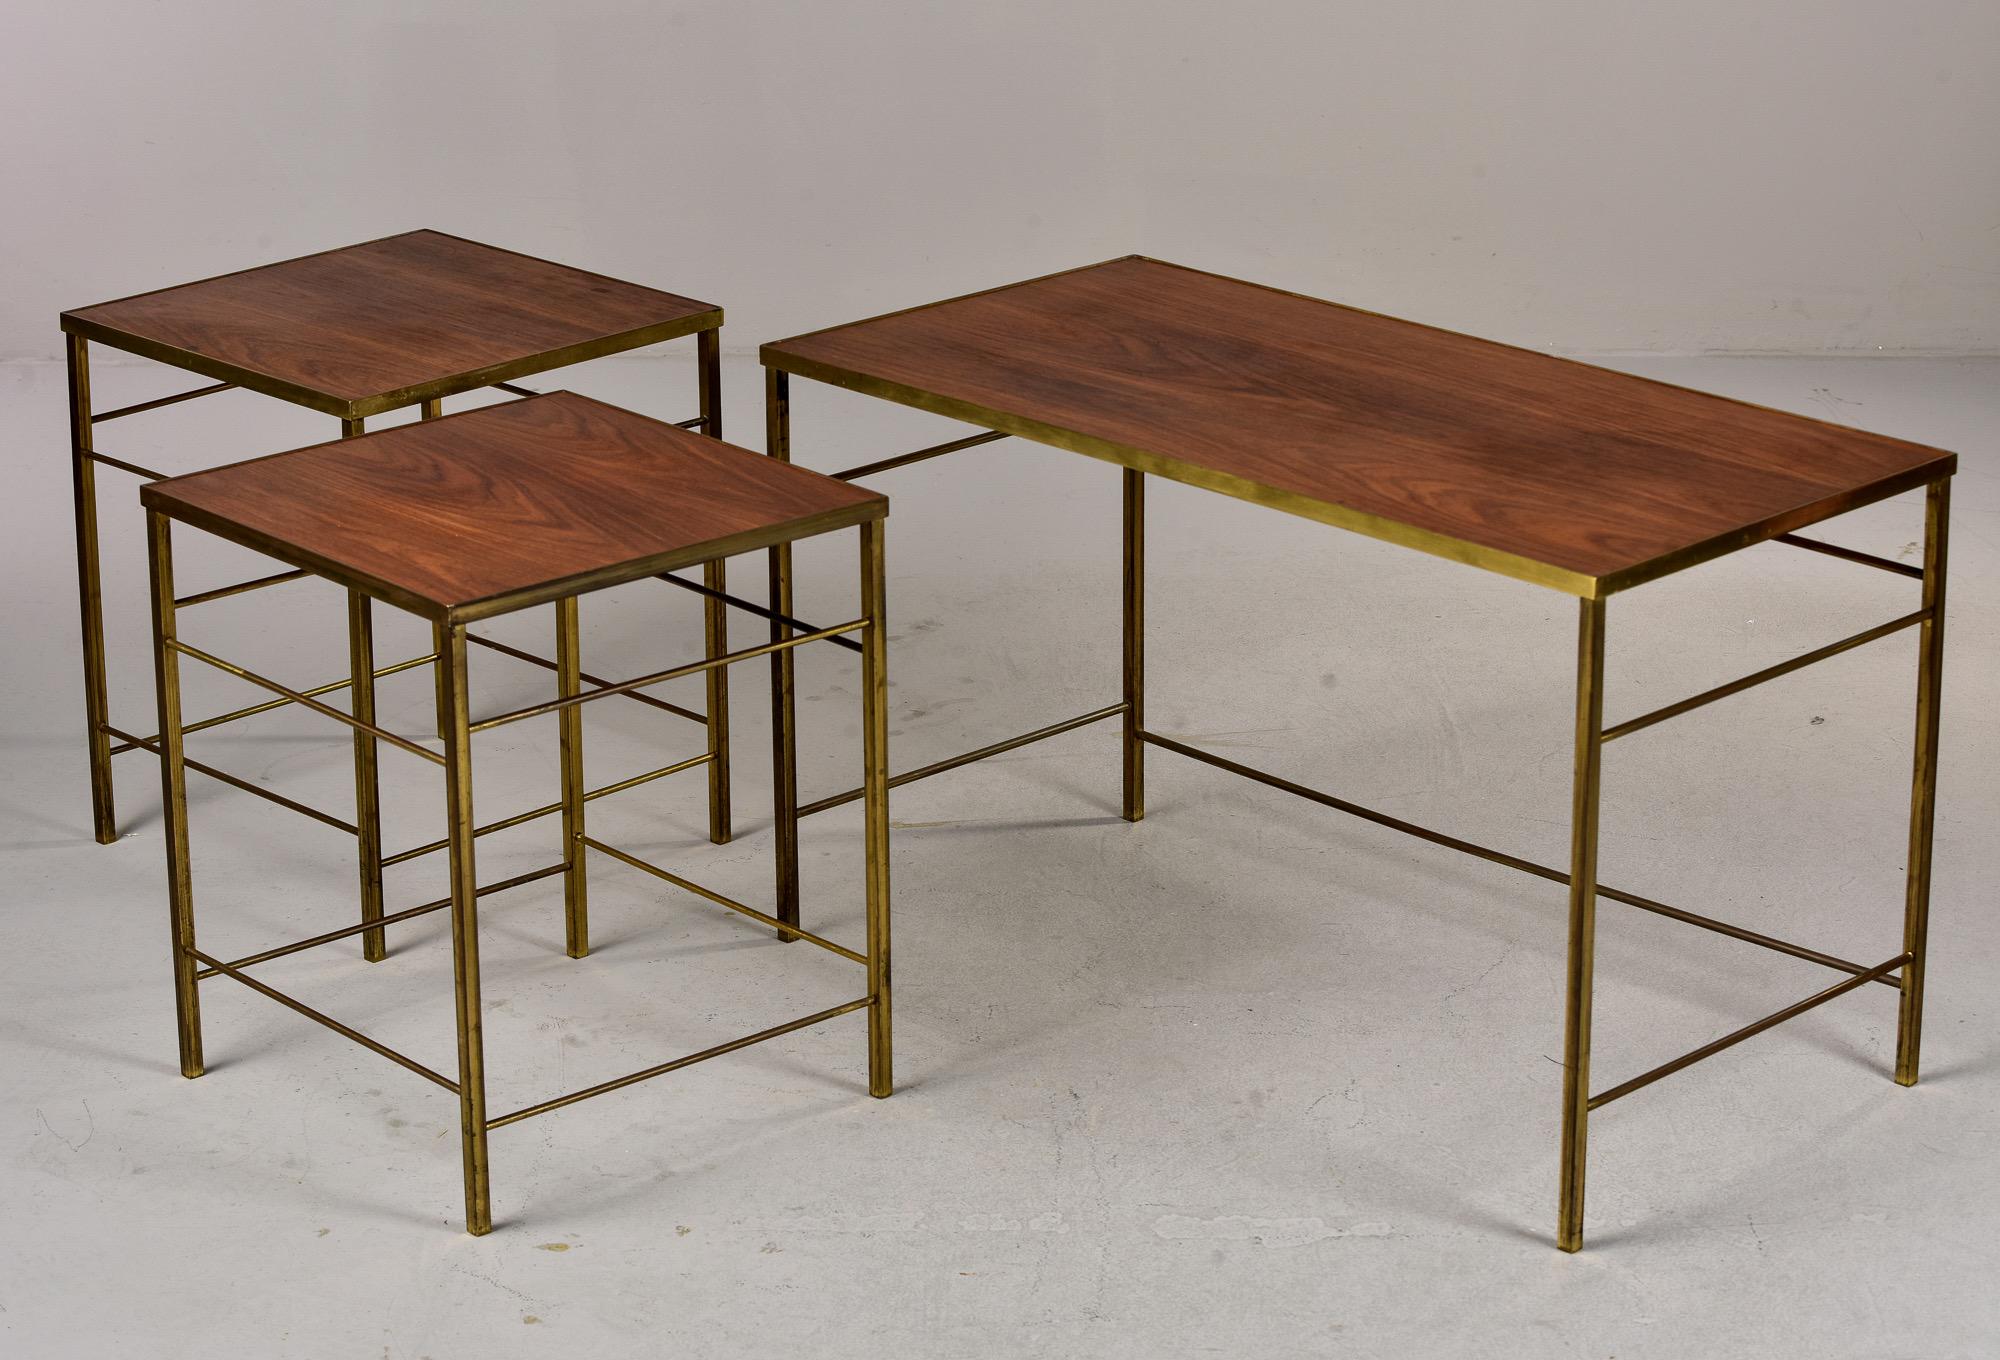 English Mid Century Brass and Wood Trio of Stacking Tables For Sale 5